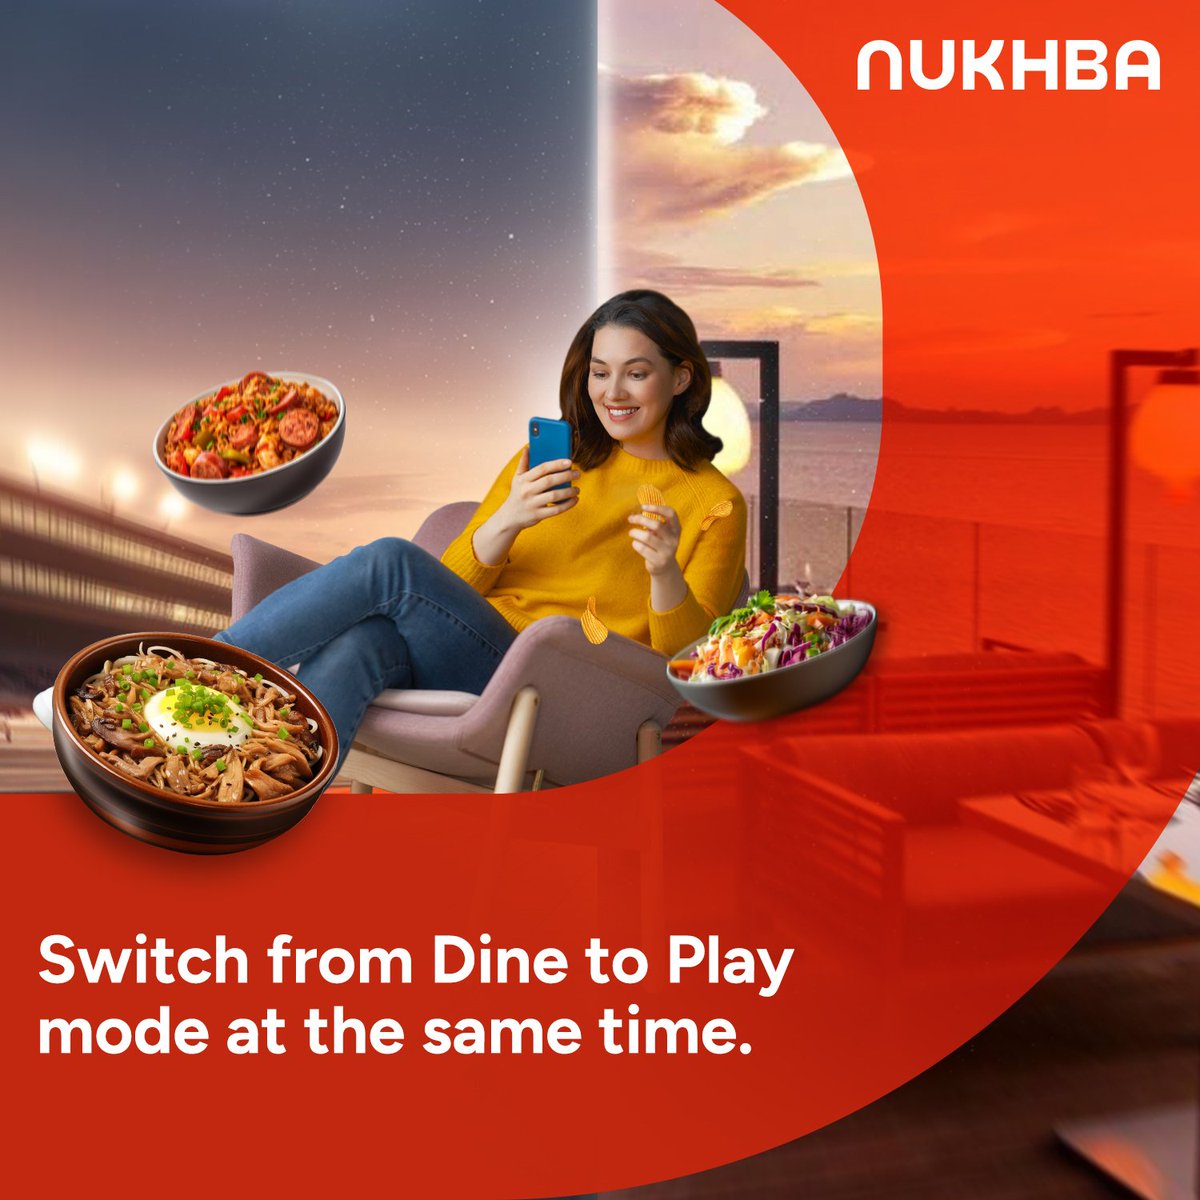 Dining meets gaming in the ultimate fusion of flavor and fun! 🍲🕹 Ready to turn your dining moments into gaming victories? Let the games begin!

#nukhba #nukhbaApp #dubairestaurants #dubaieats #dubaifood #finediningdubai #restaurantsindubai #visitdubai #mydubai #dubaifoodie